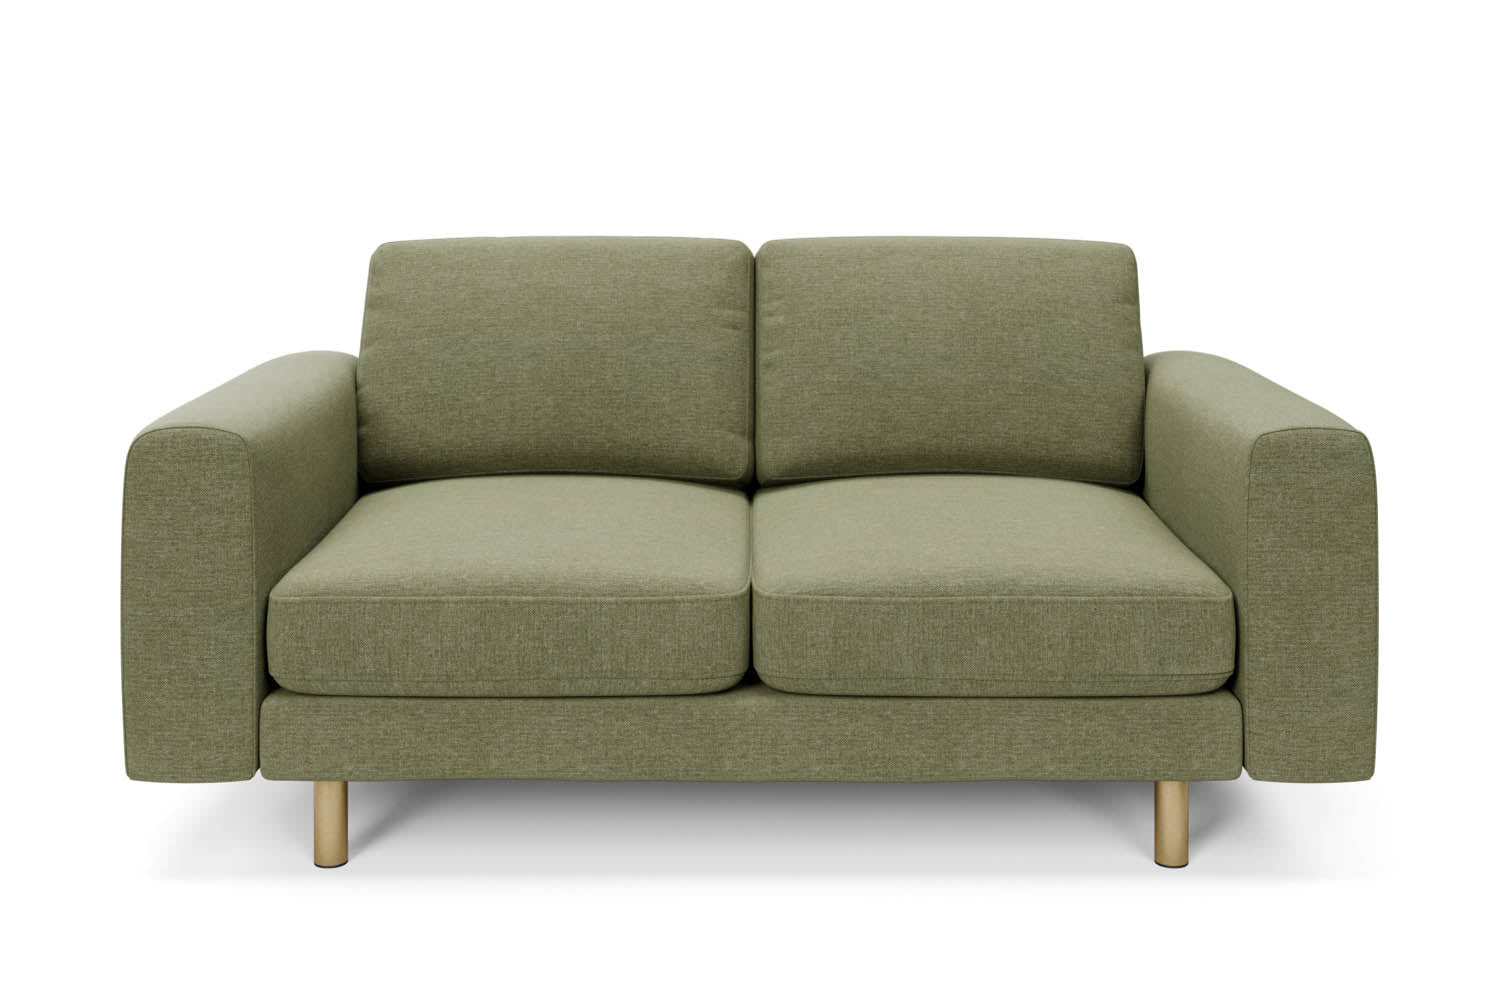 The Big Chill 2 Seater Sofa in Sage Chenille with metal legs front variant_40886317645872